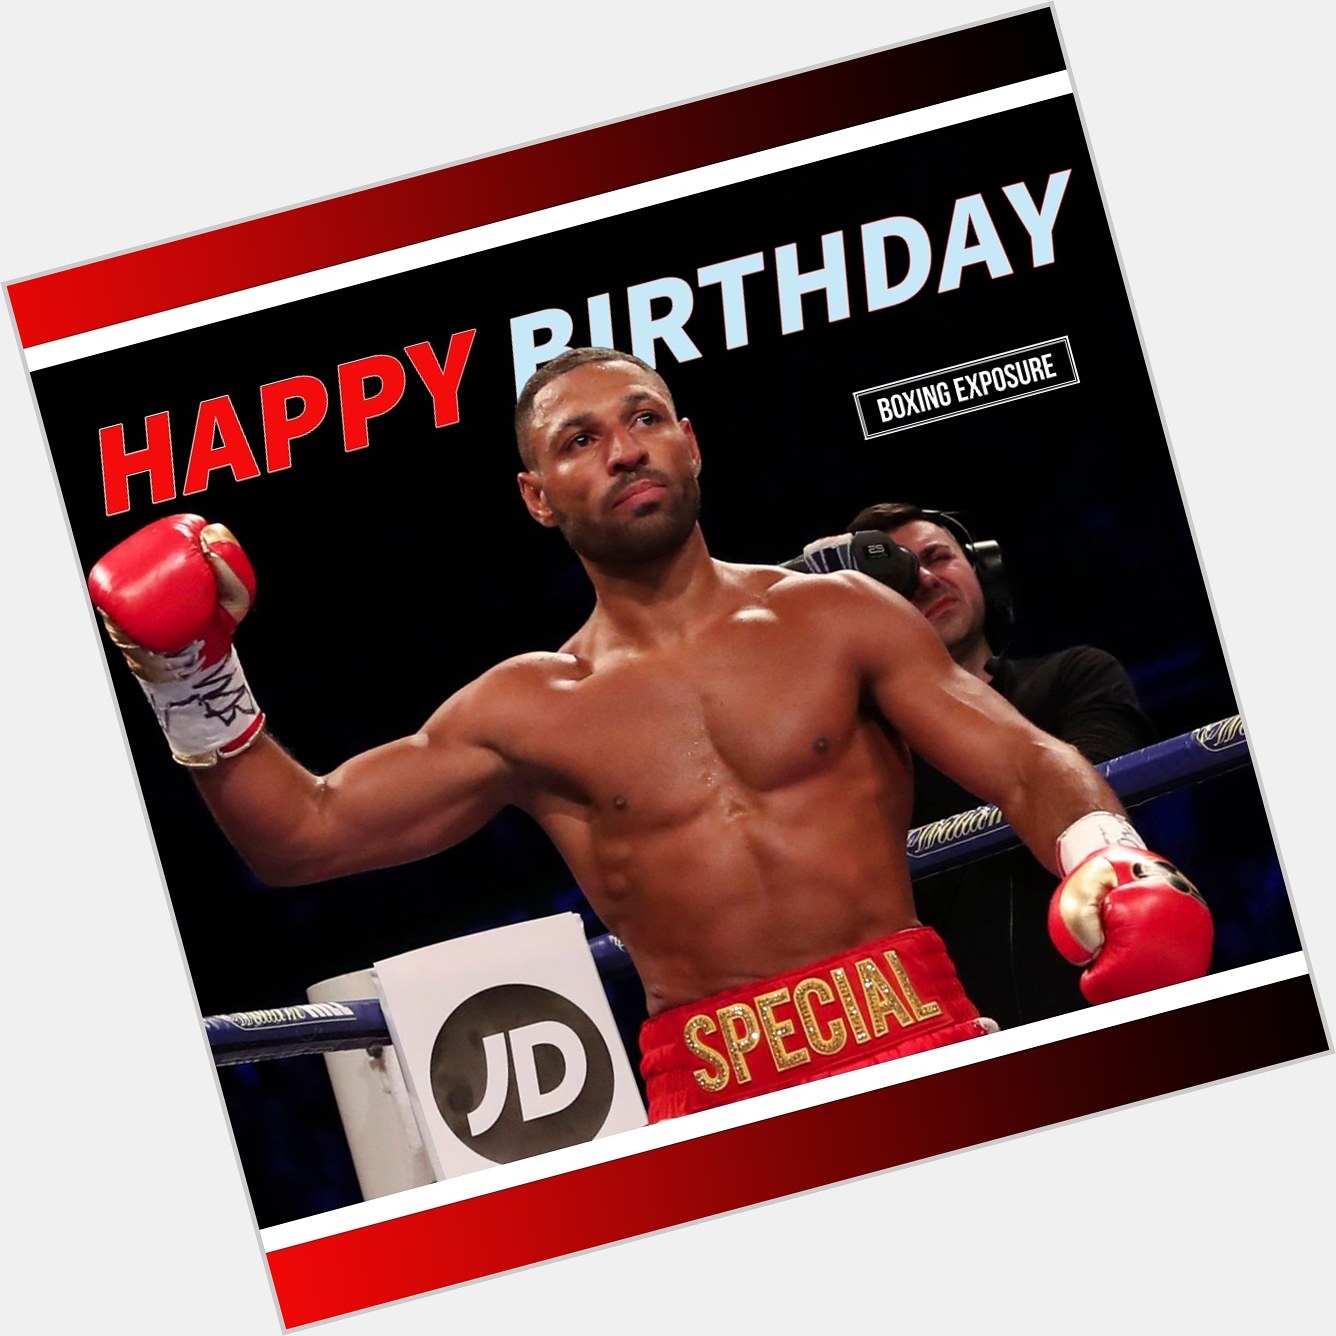 Happy 3  4  th birthday to Kell Brook Will we ever see Khan  Brook?
And do you still care? 